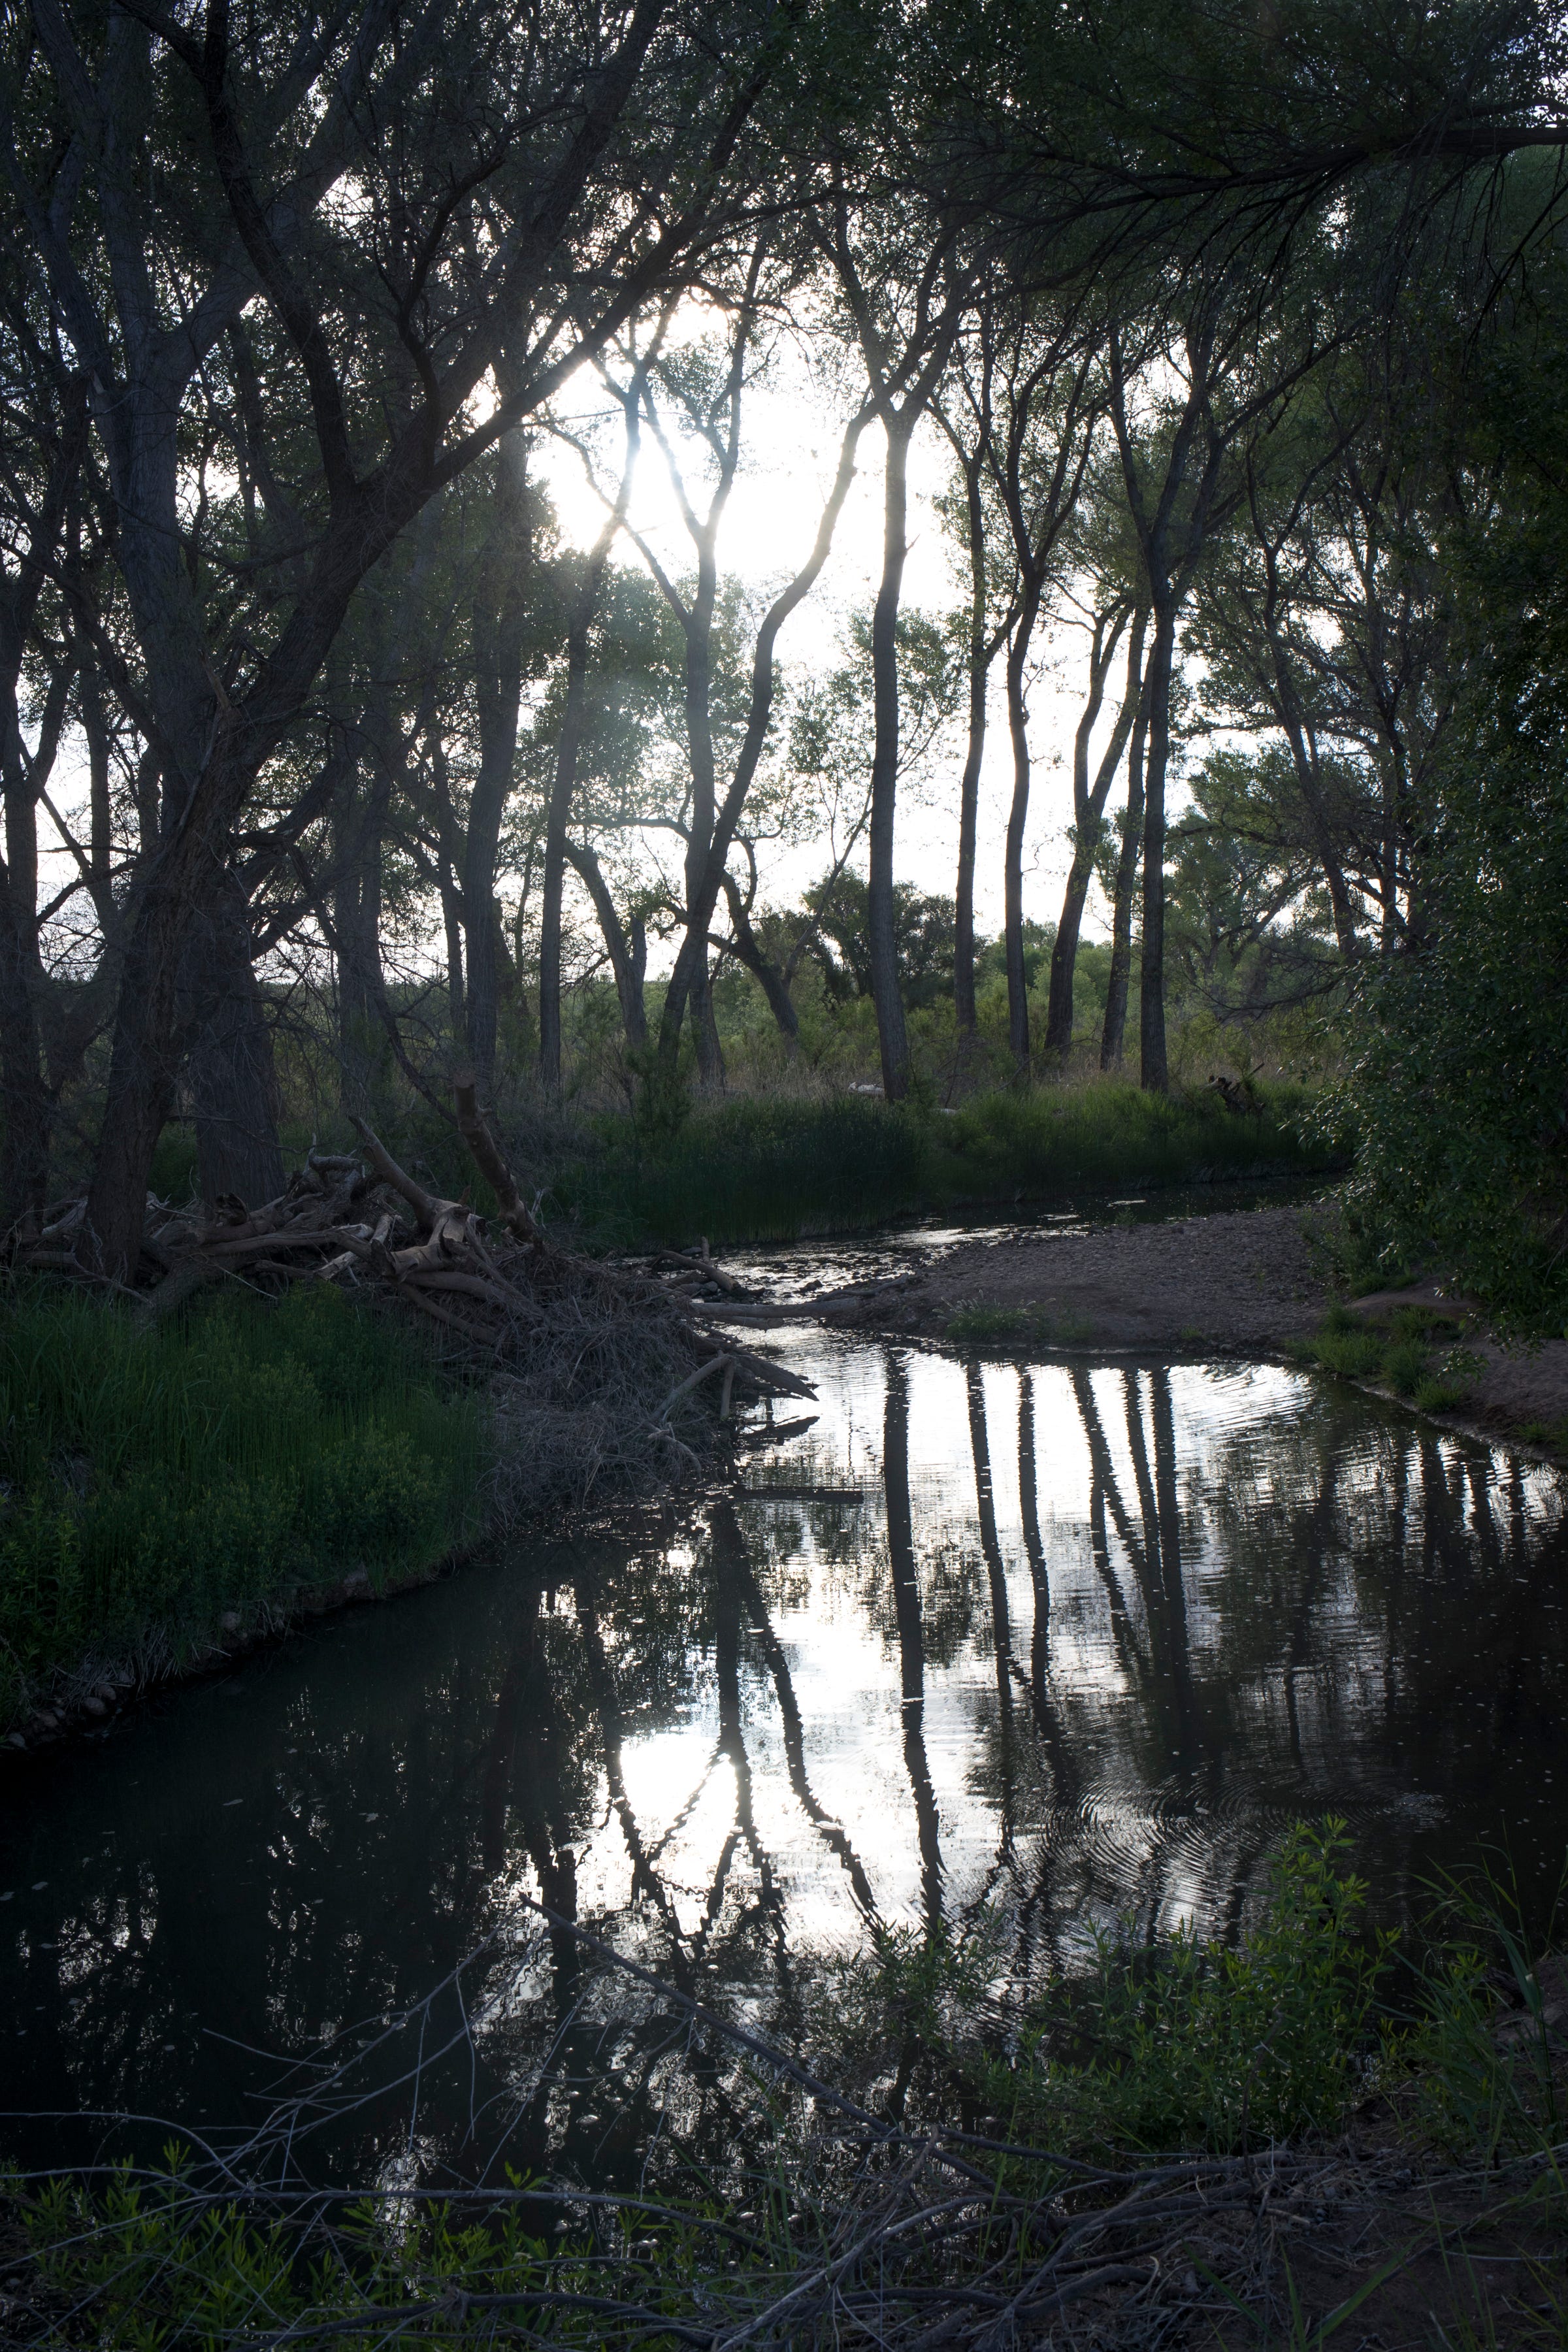 The San Pedro River is one of the last free-flowing rivers in the Southwest.